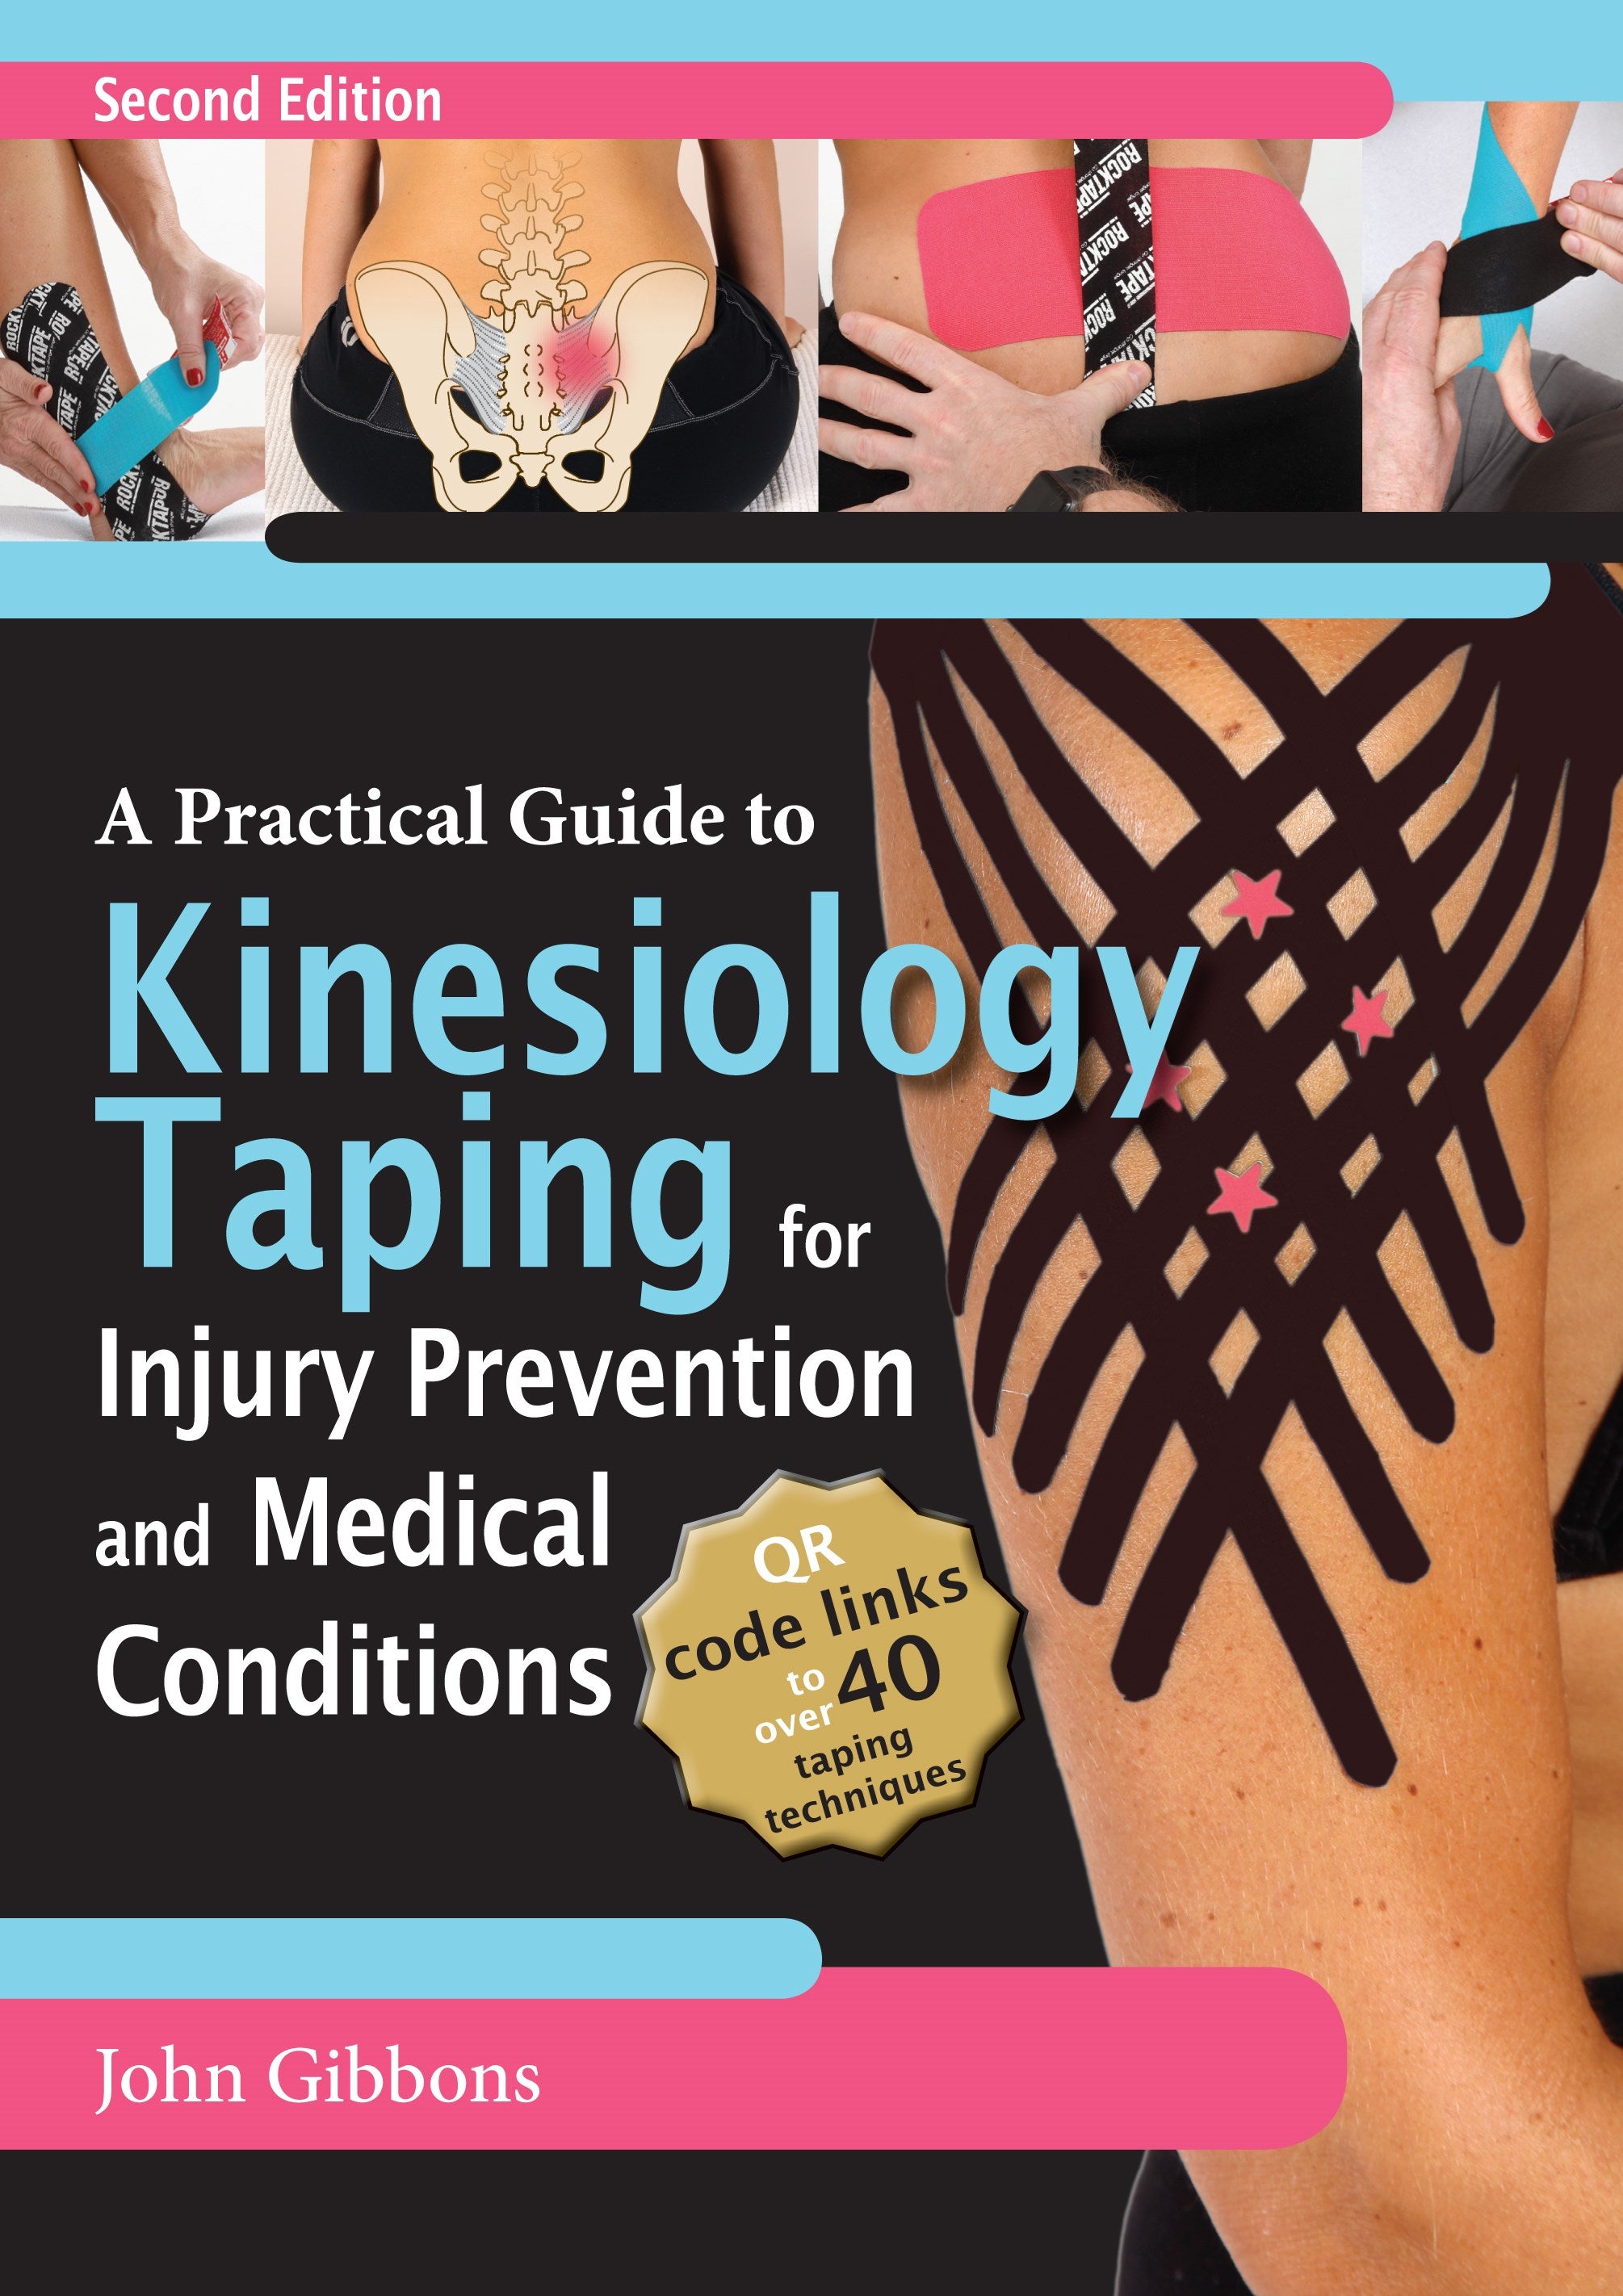 A Practical Guide to Kinesiology Taping for Injury Prevention and Common Medical Conditions  (2nd Edition)